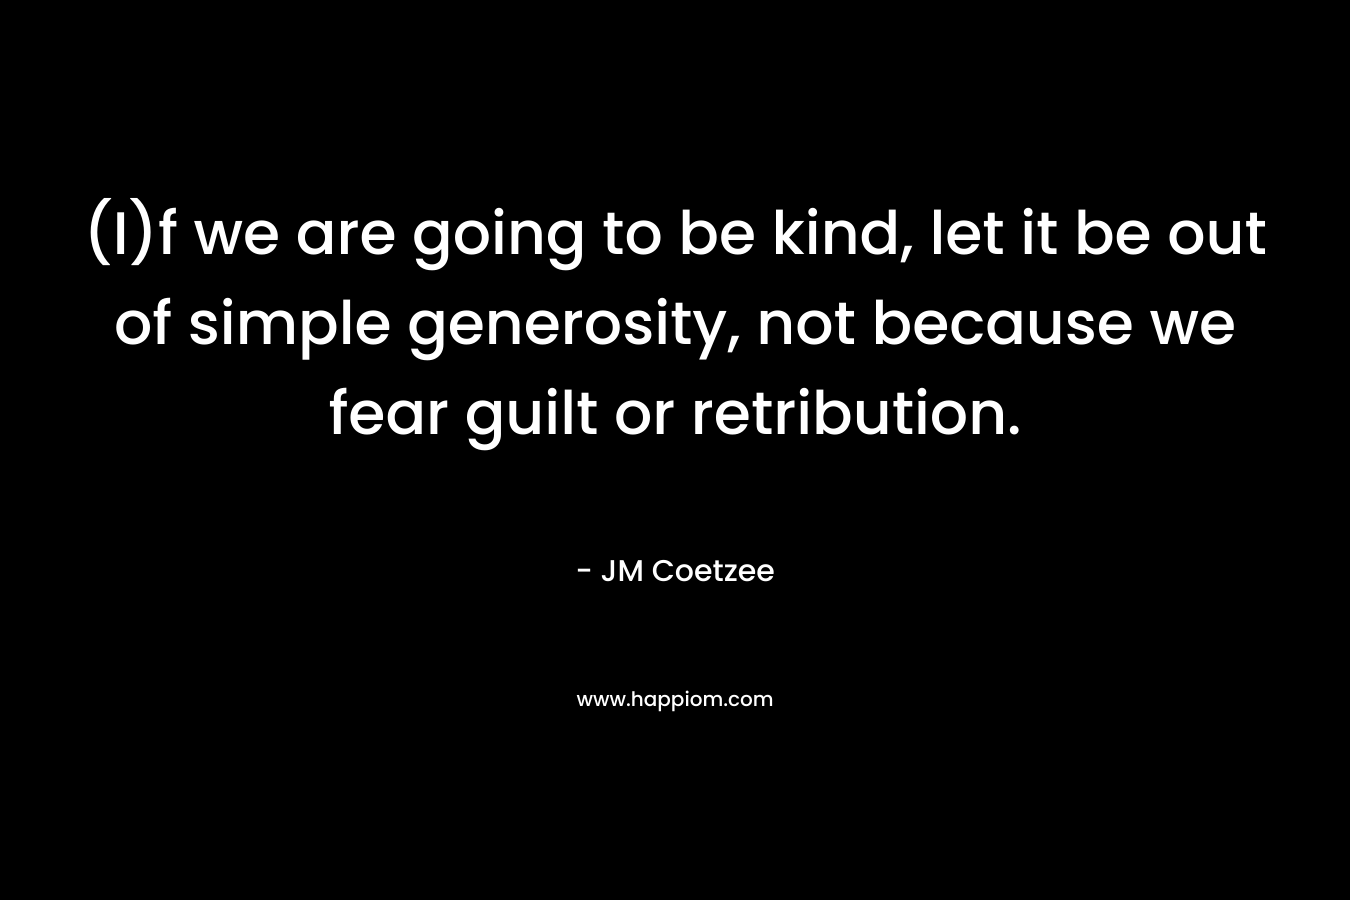 (I)f we are going to be kind, let it be out of simple generosity, not because we fear guilt or retribution.